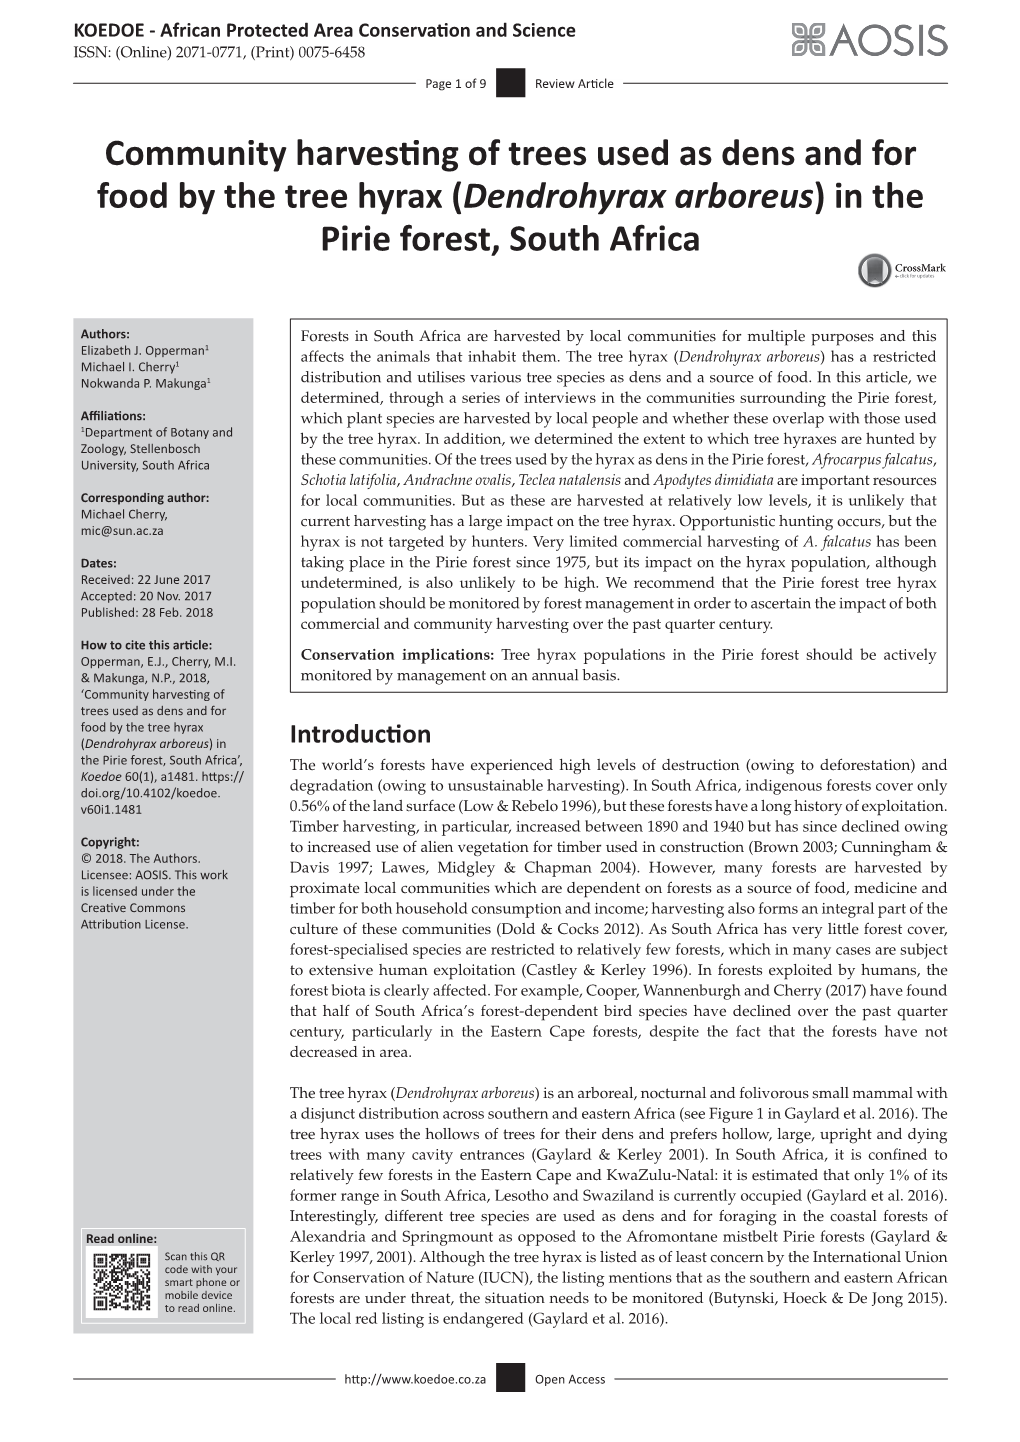 Community Harvesting of Trees Used As Dens and for Food by the Tree Hyrax (Dendrohyrax Arboreus) in the Pirie Forest, South Africa